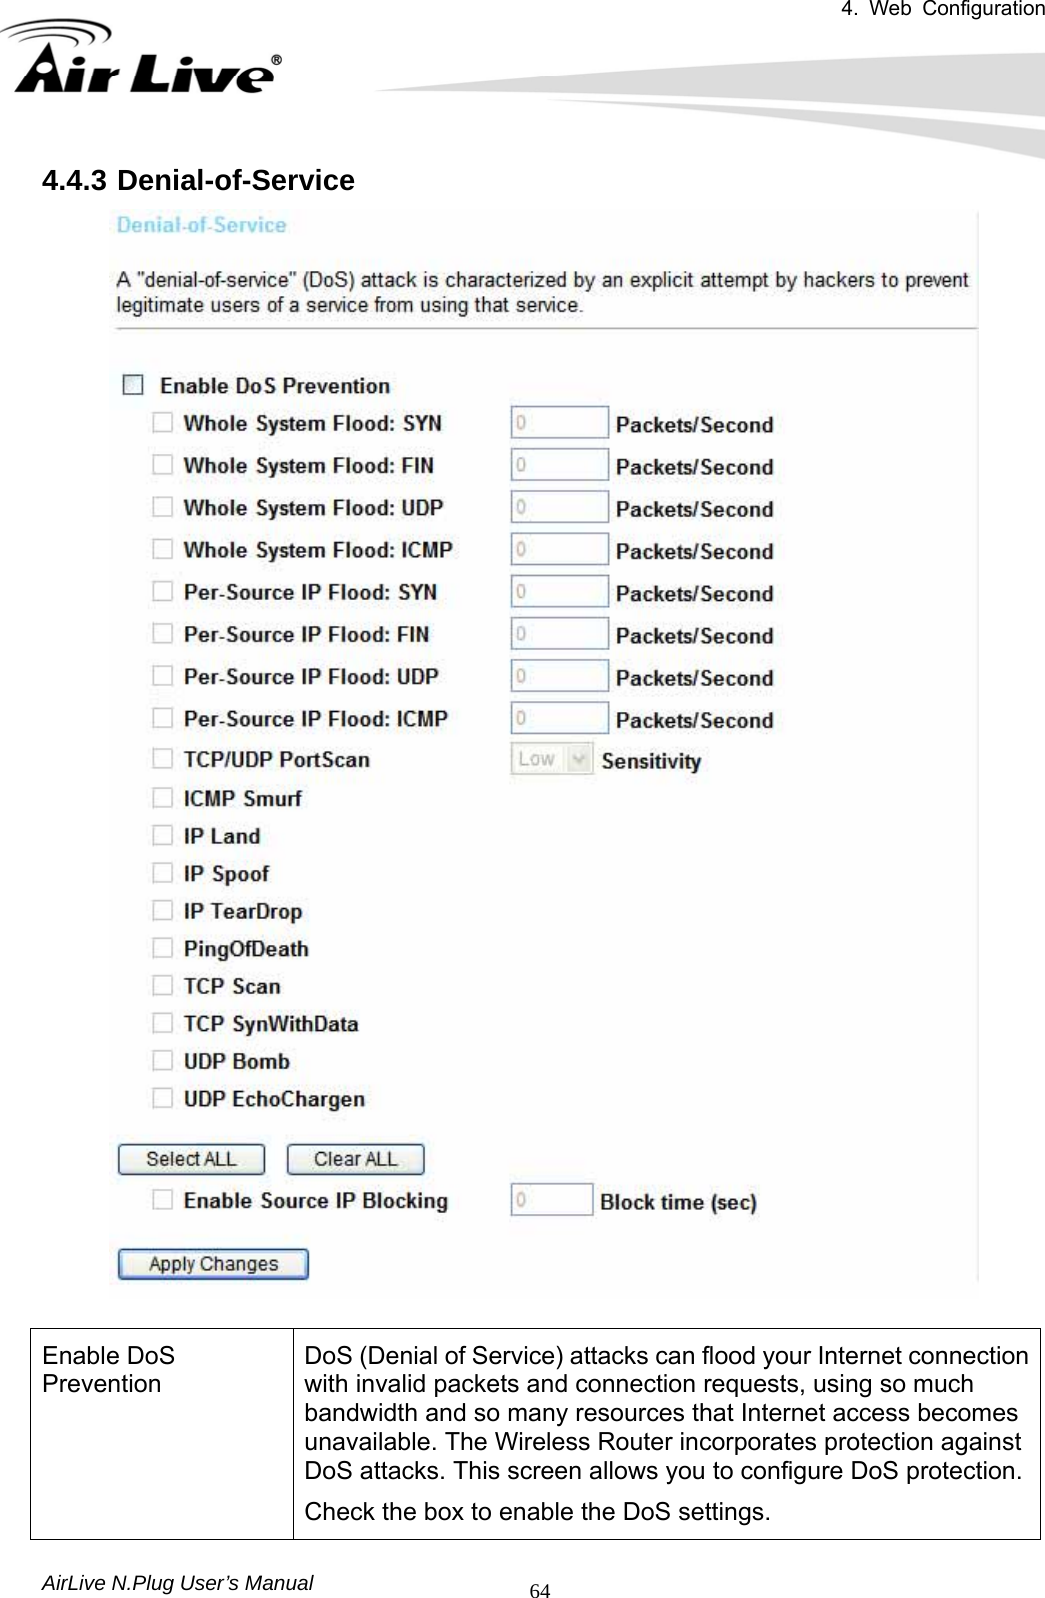 4. Web Configuration       AirLive N.Plug User’s Manual  644.4.3 Denial-of-Service   Enable DoS Prevention DoS (Denial of Service) attacks can flood your Internet connection with invalid packets and connection requests, using so much bandwidth and so many resources that Internet access becomes unavailable. The Wireless Router incorporates protection against DoS attacks. This screen allows you to configure DoS protection.   Check the box to enable the DoS settings. 